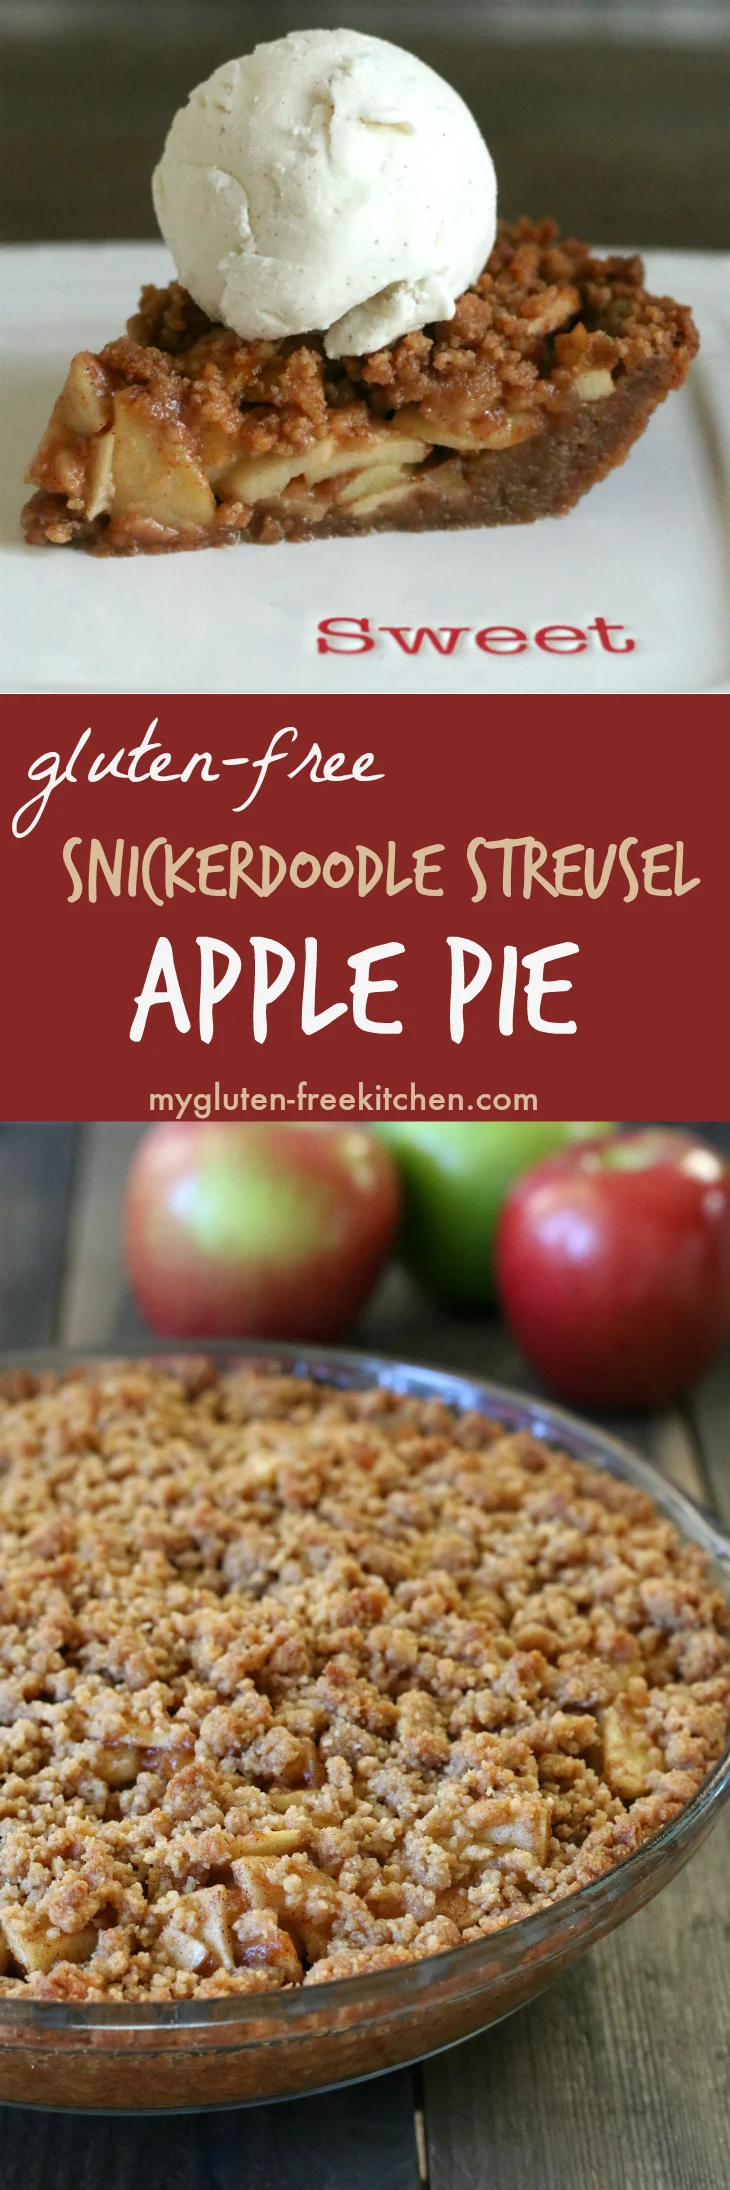 Gluten-free Apple Pie with Snickerdoodle Streusel. Amazing pie recipe!! I never liked apple pie until I had this one!